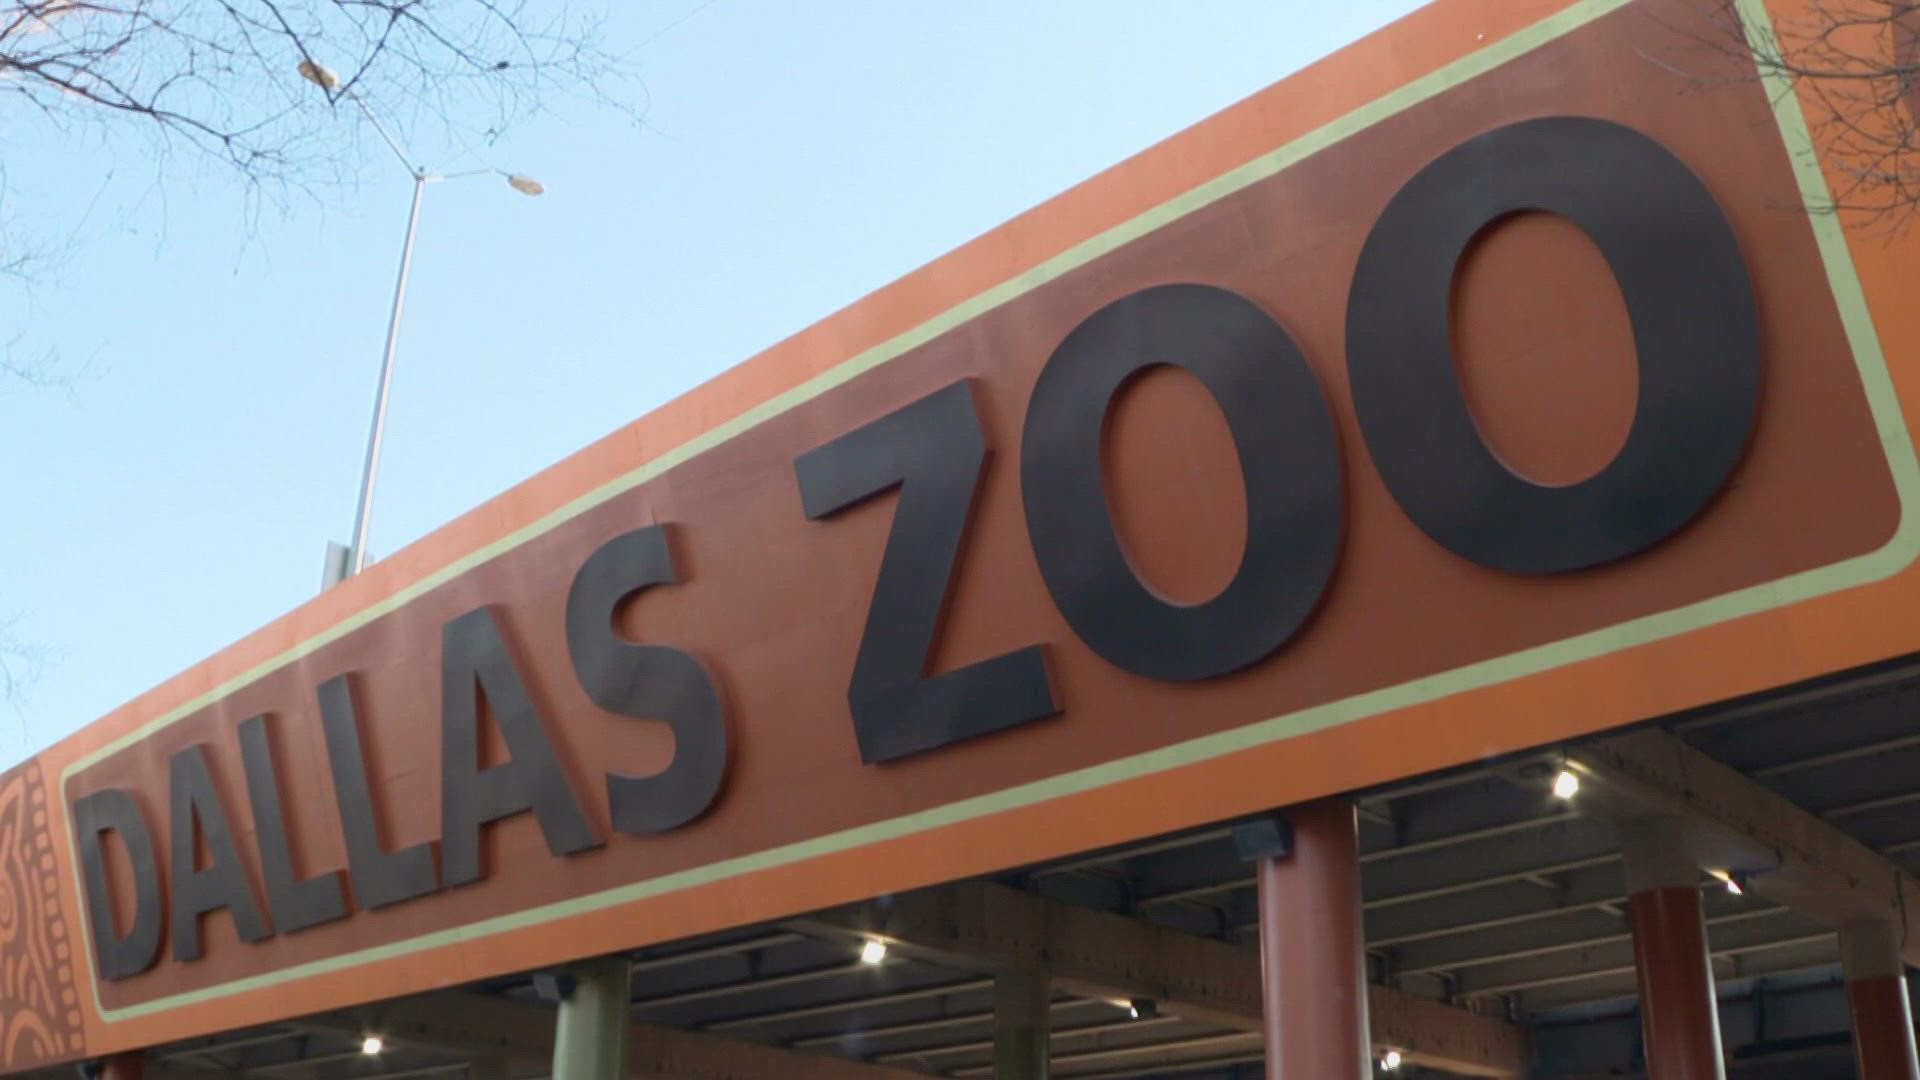 The zoo announced the death of one of the endangered vultures in its Wilds of Africa habitat Saturday night, and said it does not appear to be of natural causes.